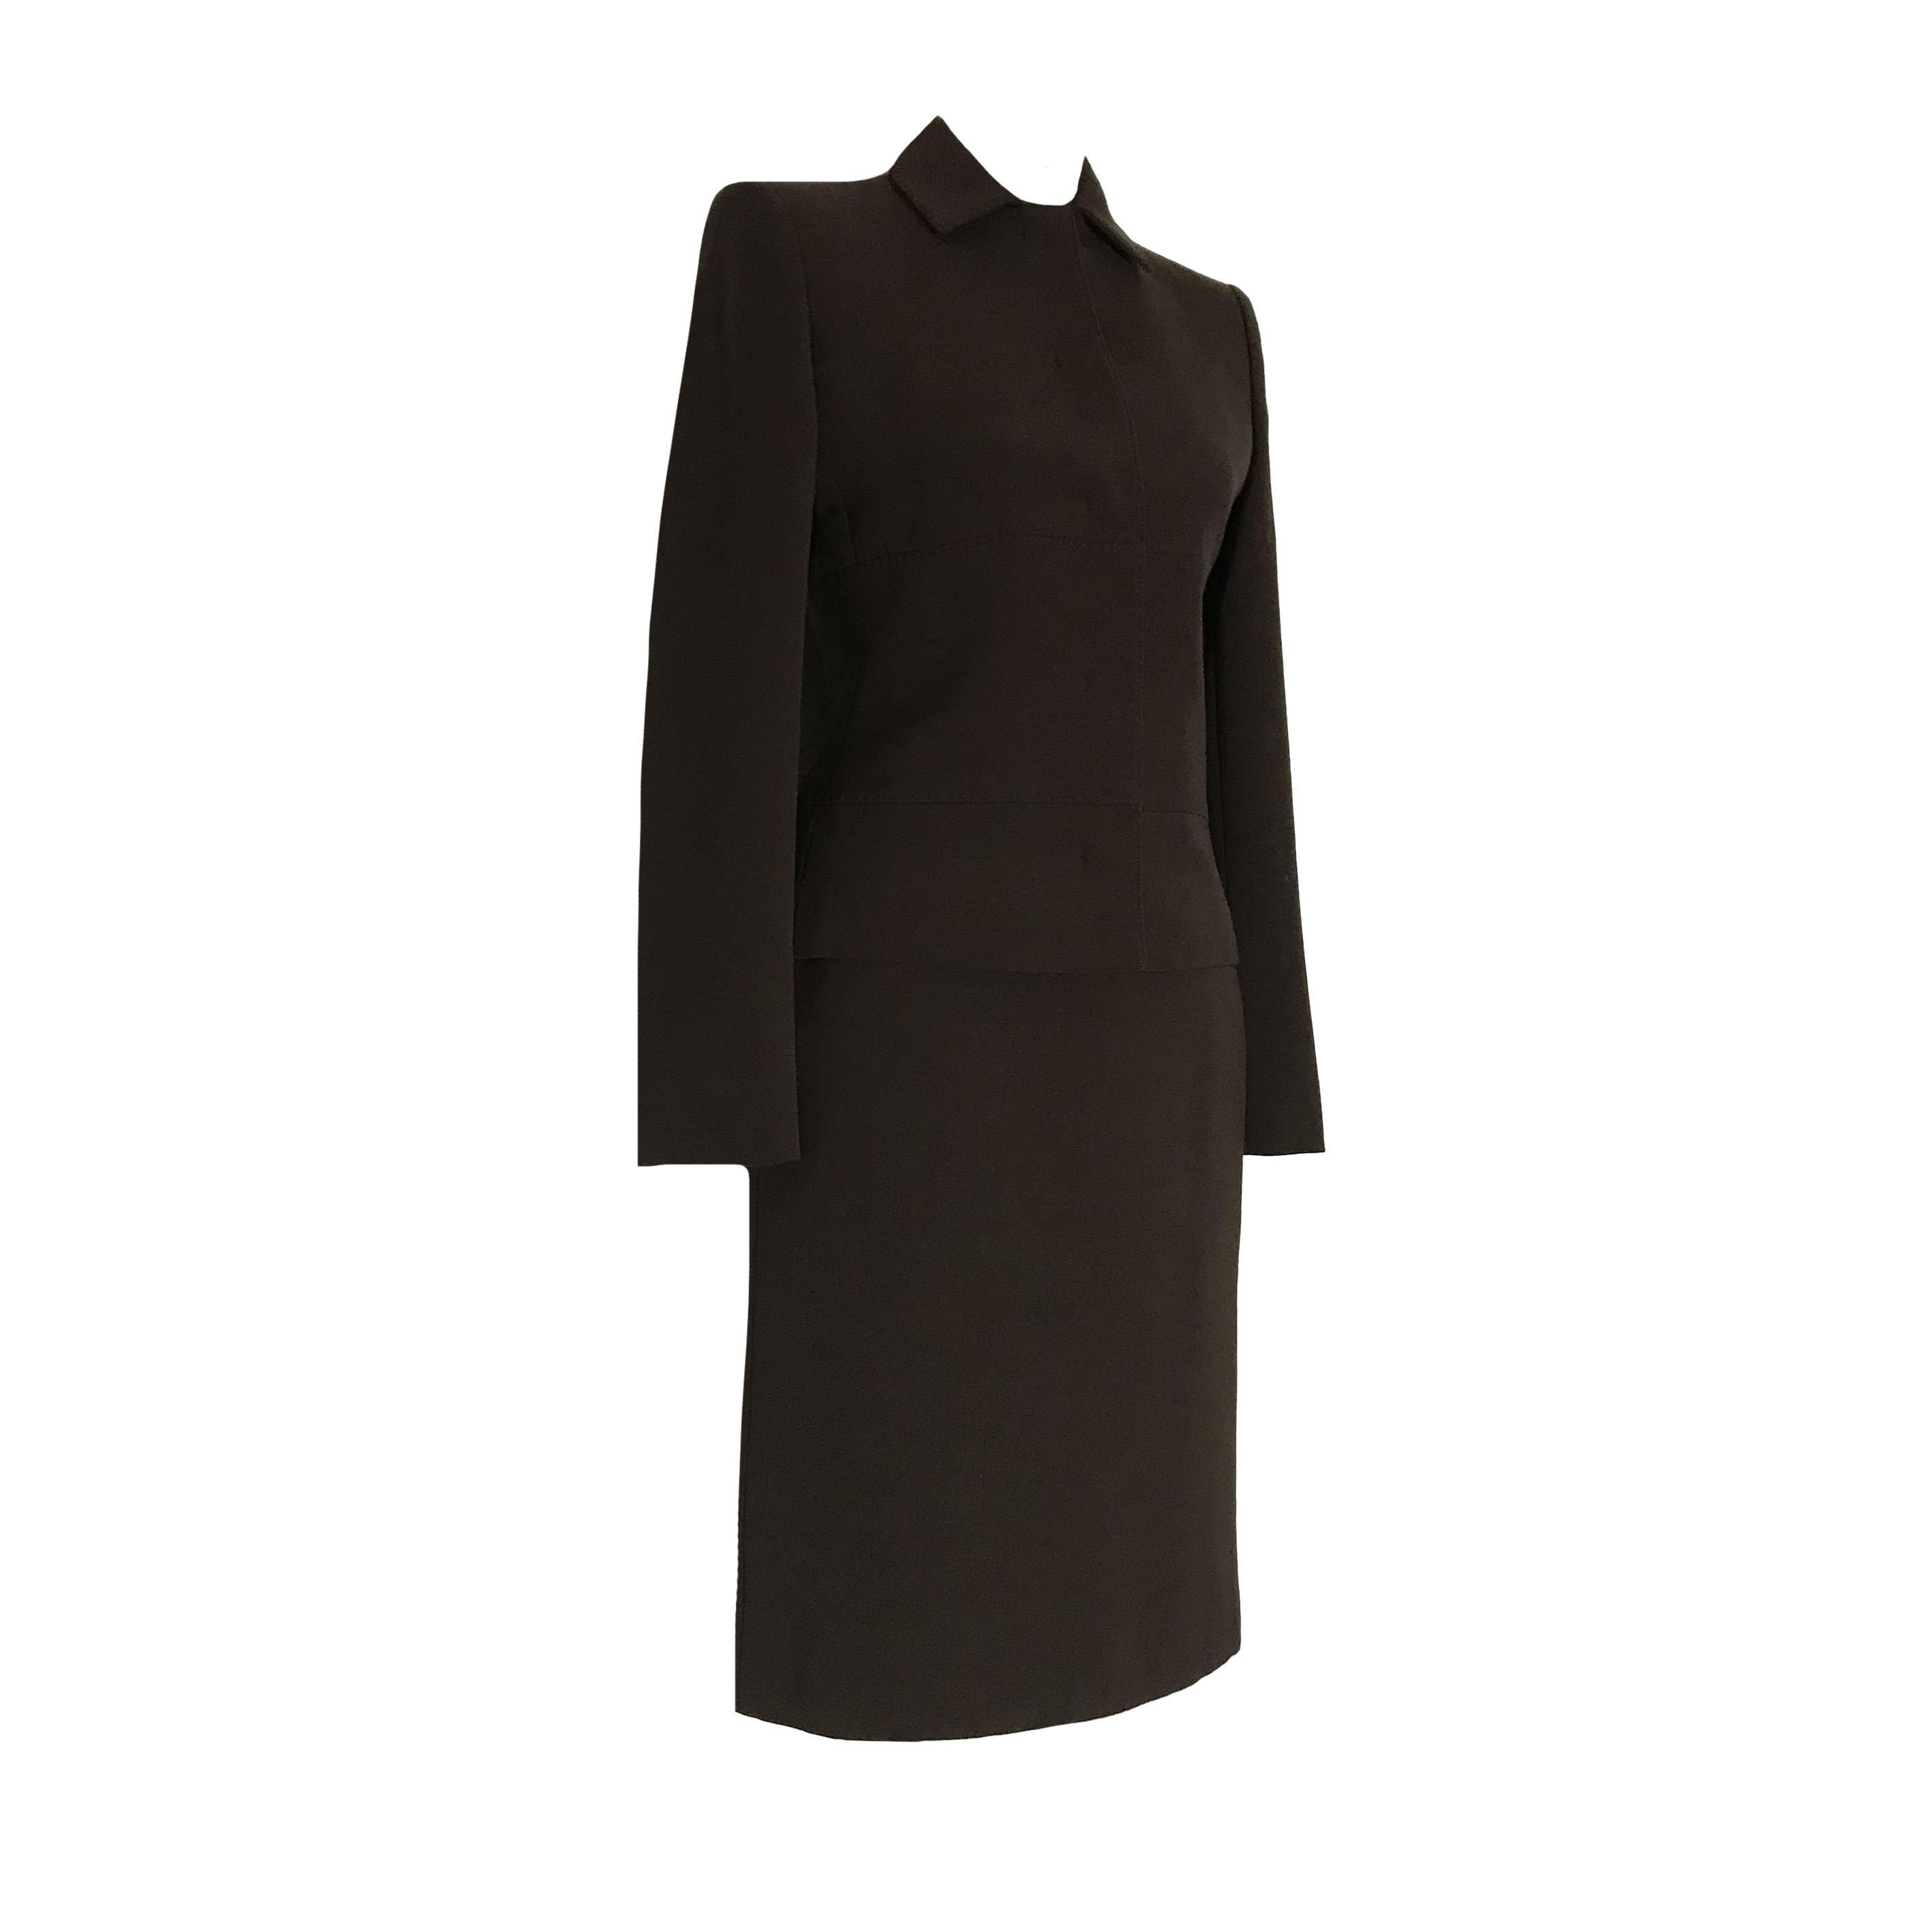 VALENTINO Roma 2000s Dark brown skirt suit

Tag VALENTINO

Size M



TAILORED JACKET
Shoulder 40cm
Chest 42cm
Length 51cm
Sleeve 55cm

Close with hidden press stud



SKIRT
Waist 33cm
Length 54cm


Zip on a side
2 Slot on the skirt bottom,